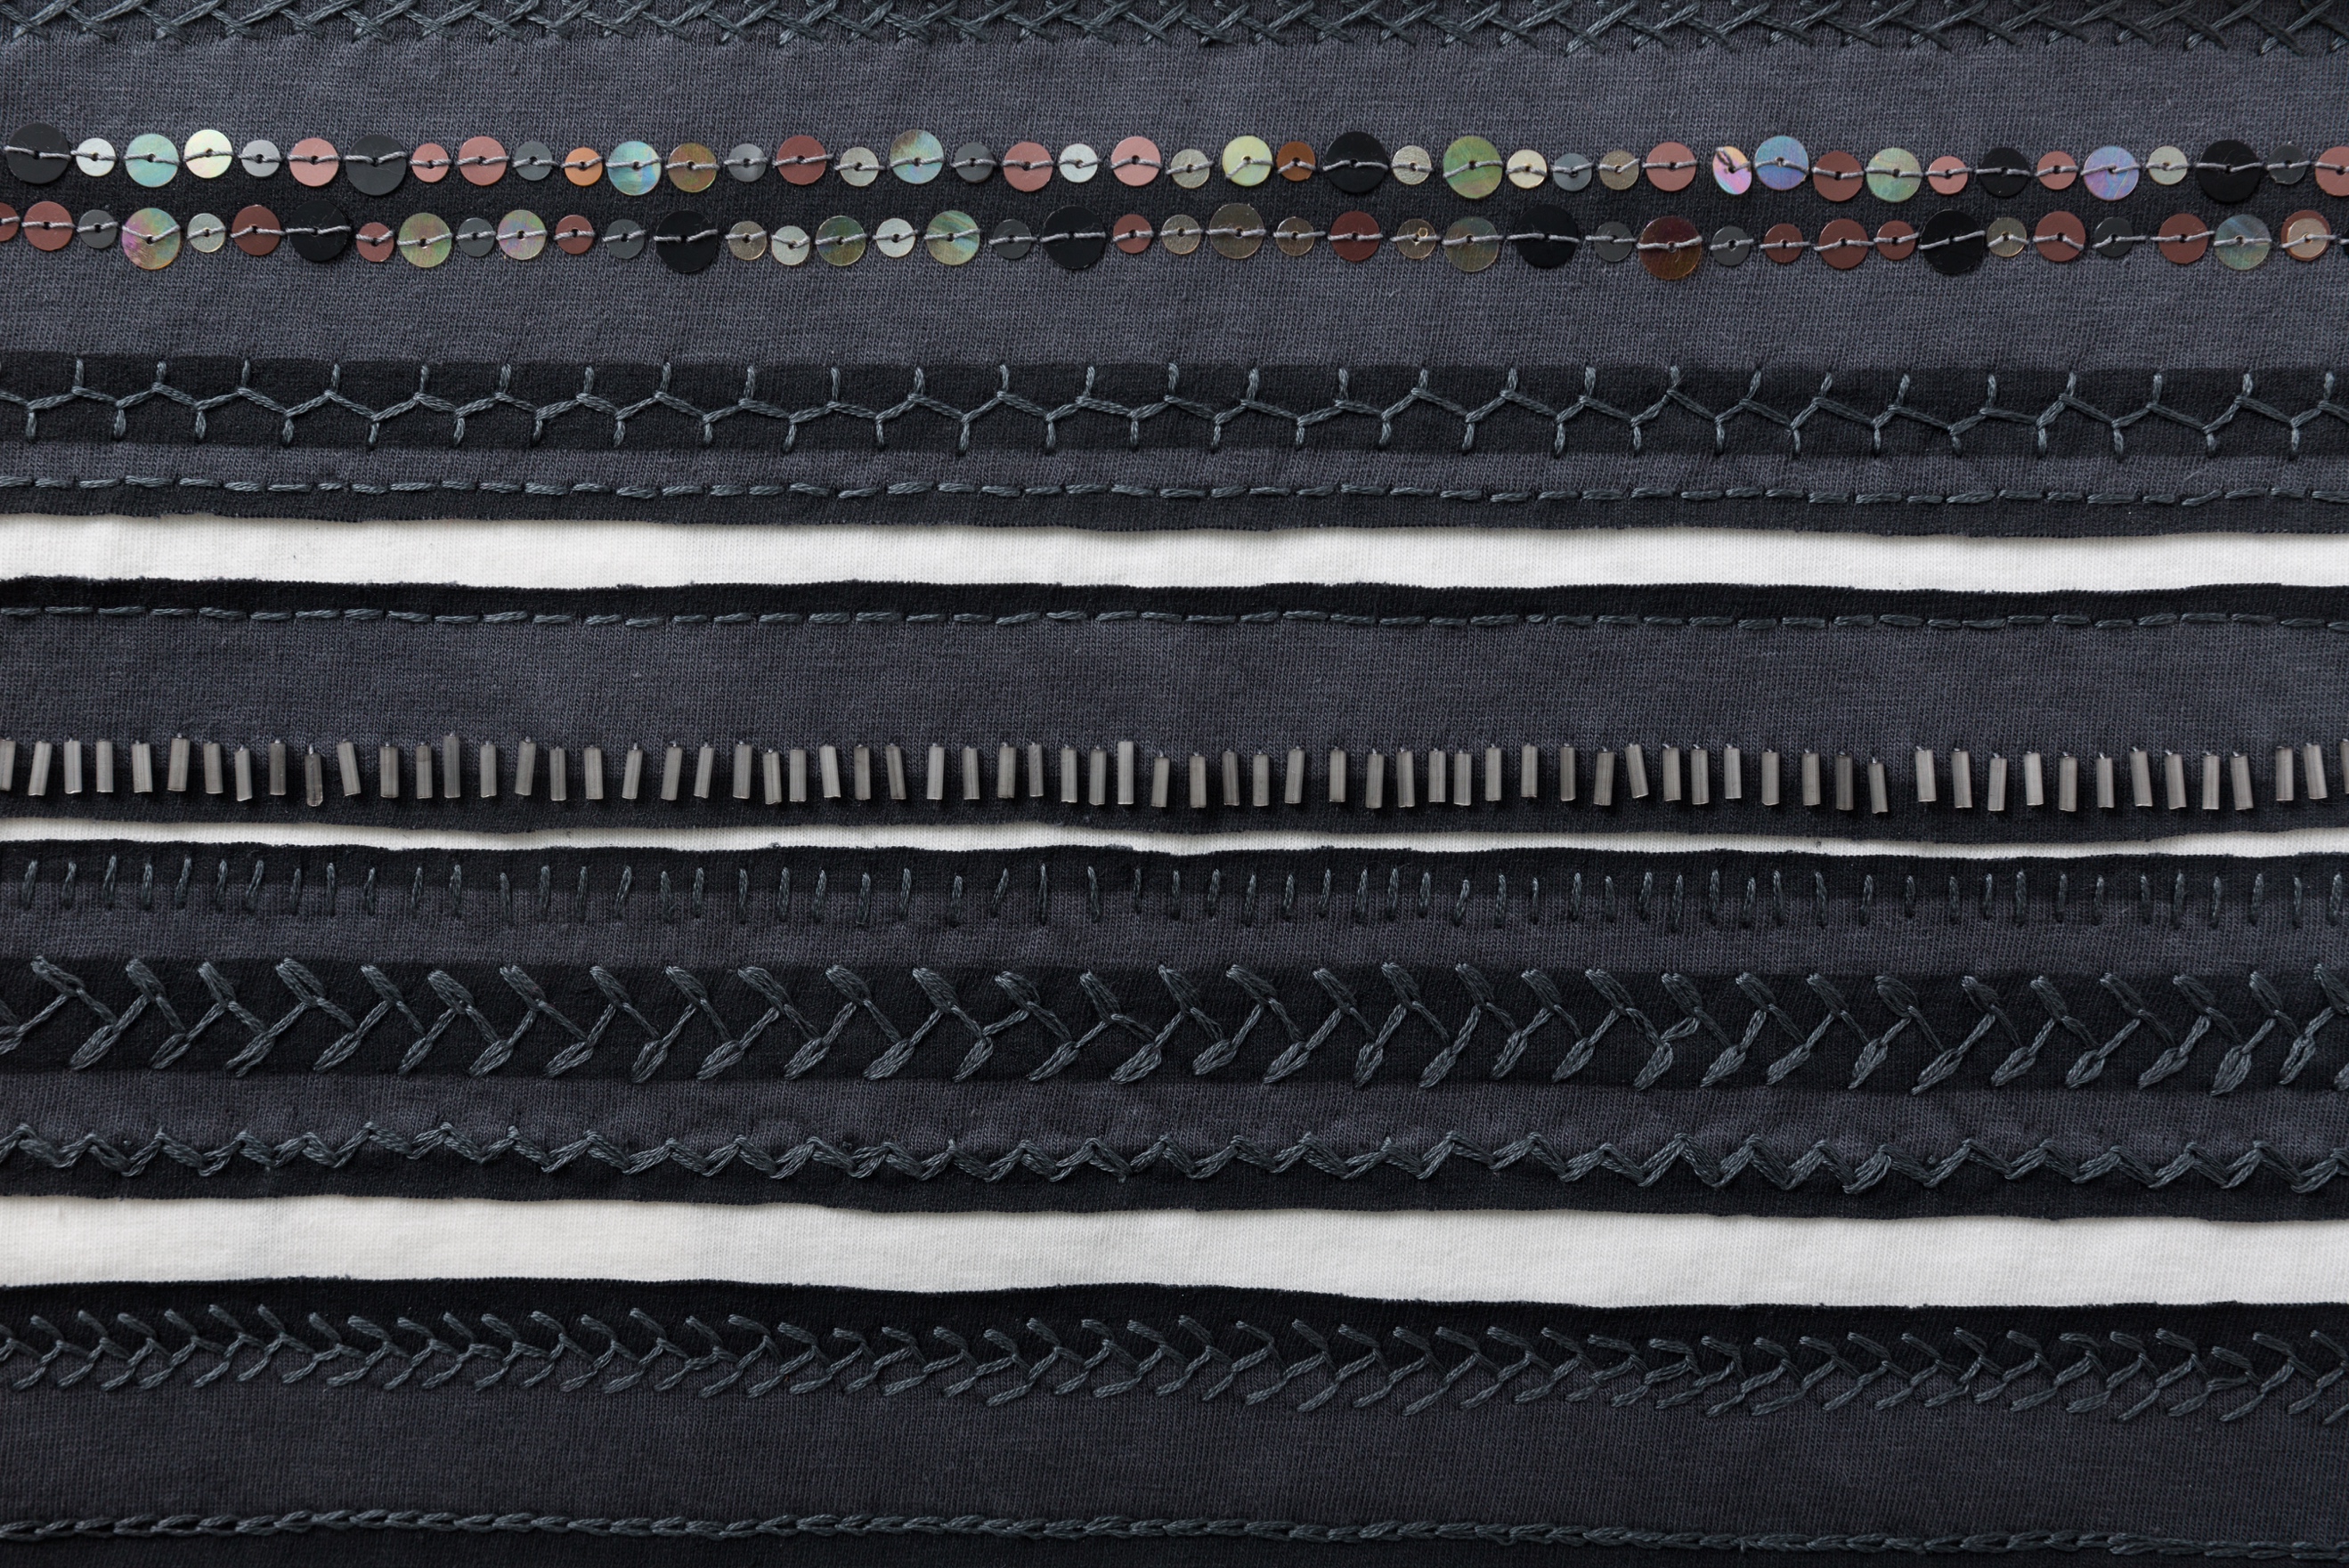 /Users/maggiecrisler/Dropbox/1 - PHOTOGRAPHY WORKING/5 - The School of Making/Swatches/Fabric Swatch - Stripe - Beaded Embroidery - Blue Slate-White - 27716 - January 2018 - Abraham Rowe 1.jpg